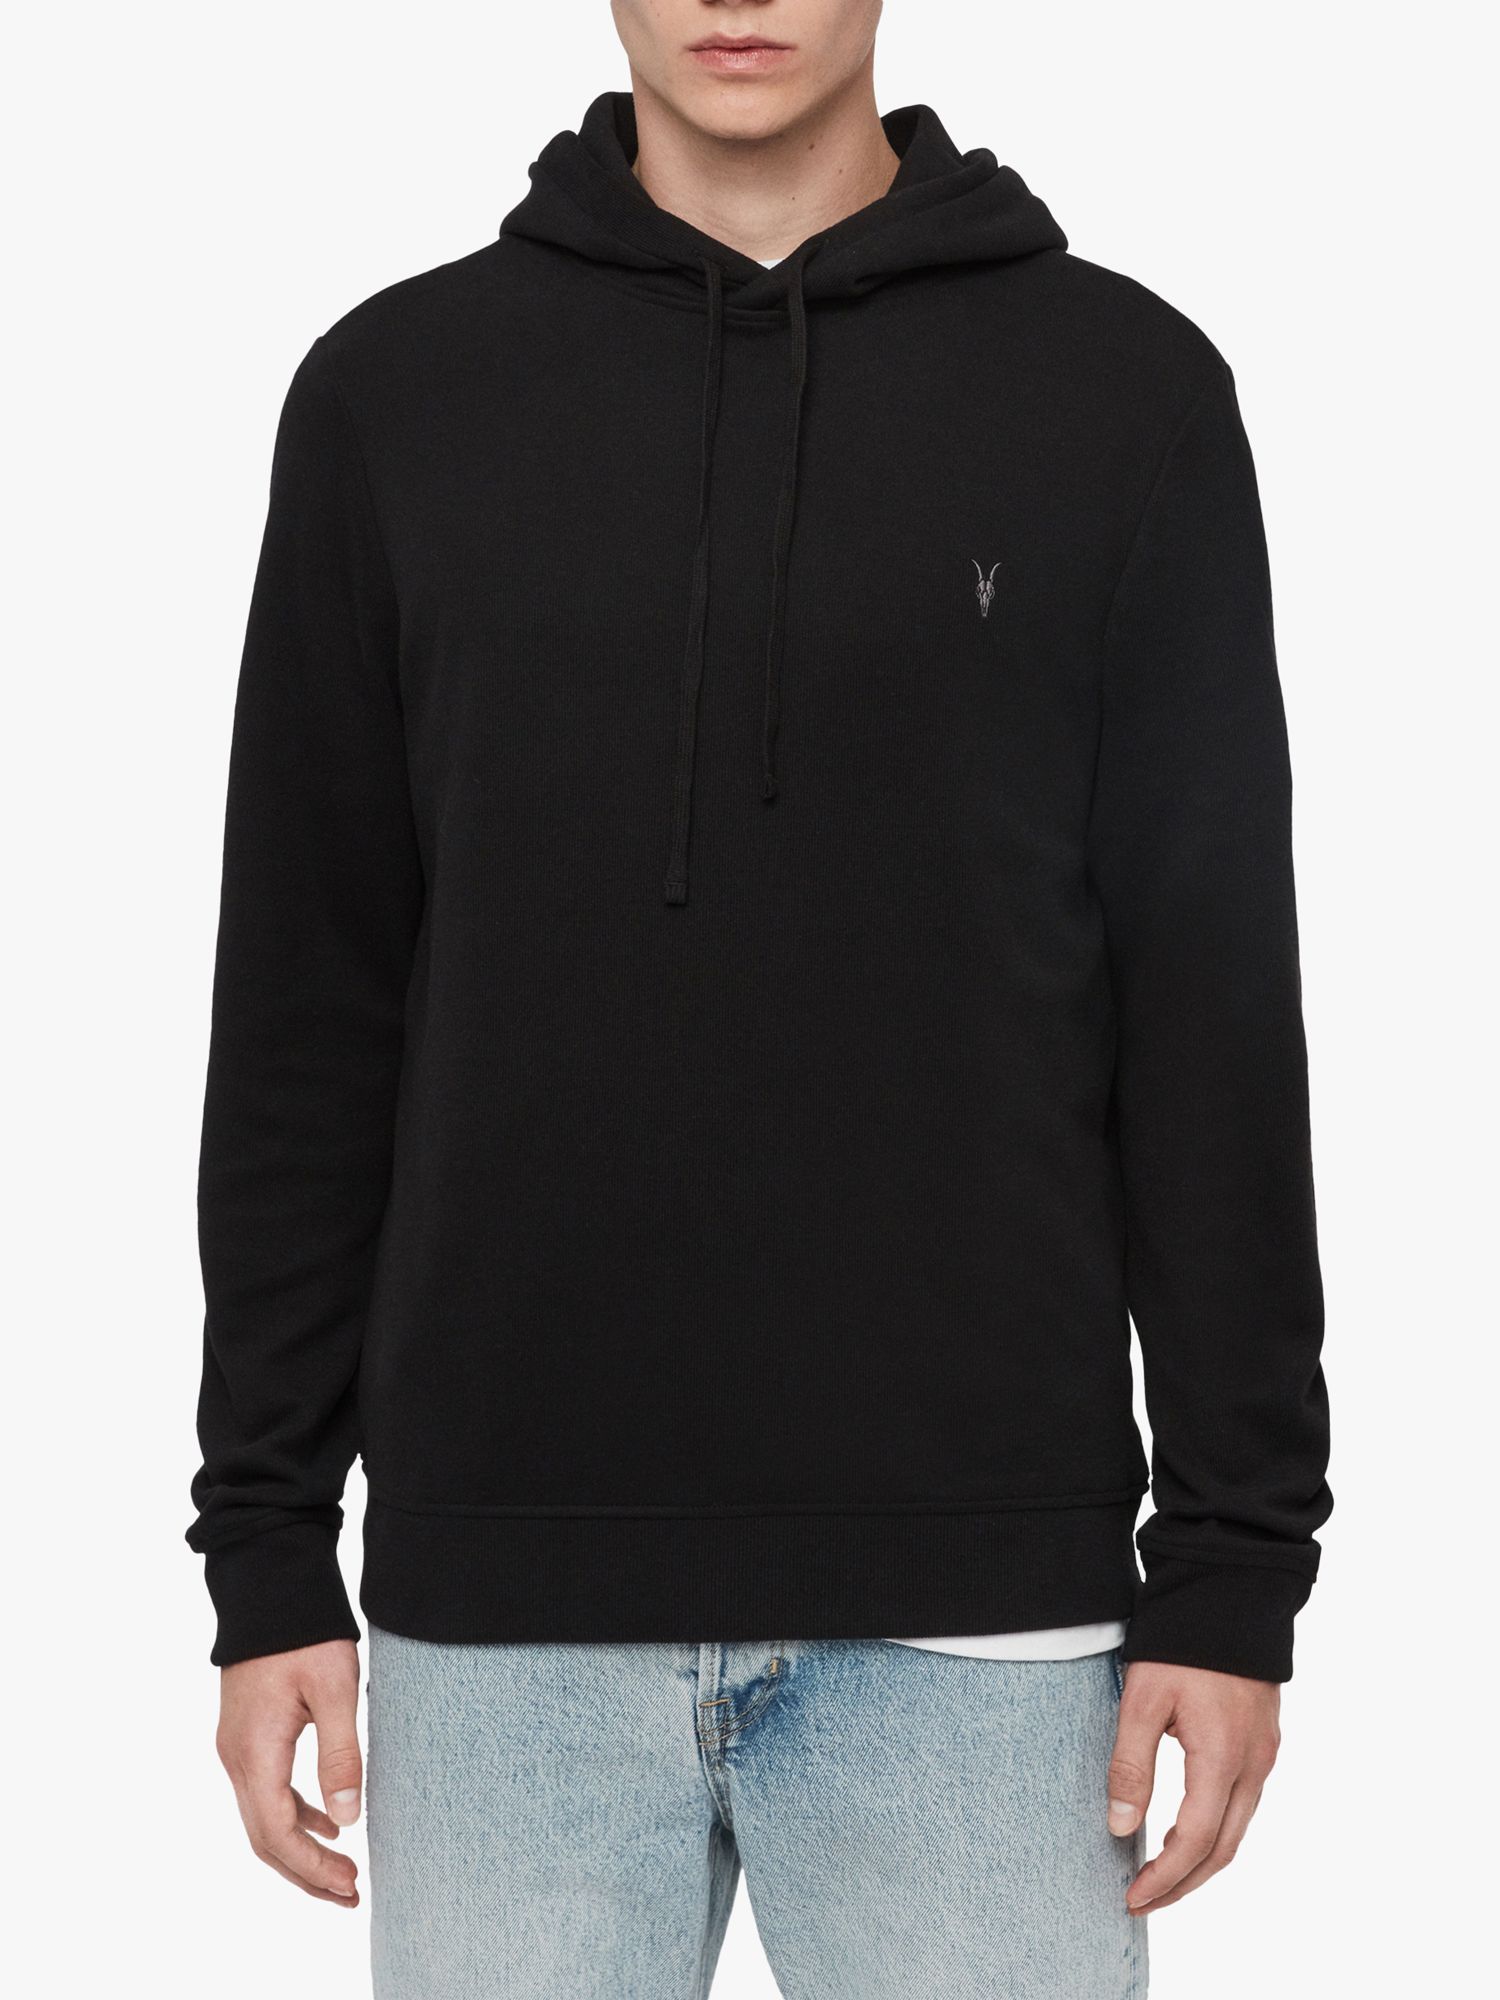 AllSaints Theo Pullover Hoodie